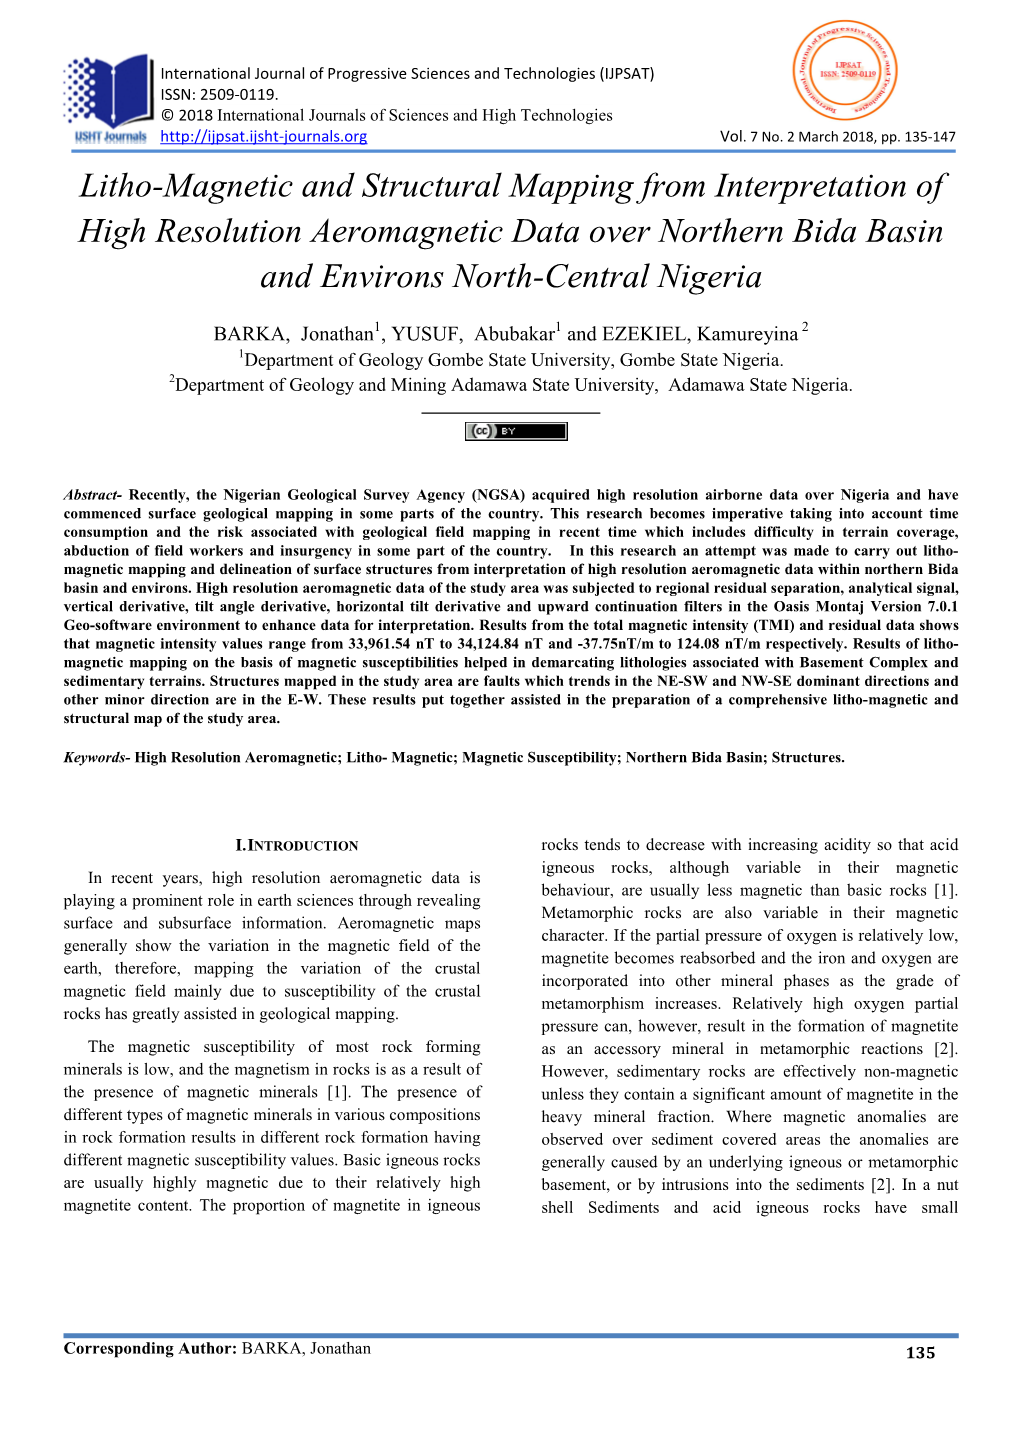 Litho-Magnetic and Structural Mapping from Interpretation of High Resolution Aeromagnetic Data Over Northern Bida Basin and Environs North-Central Nigeria